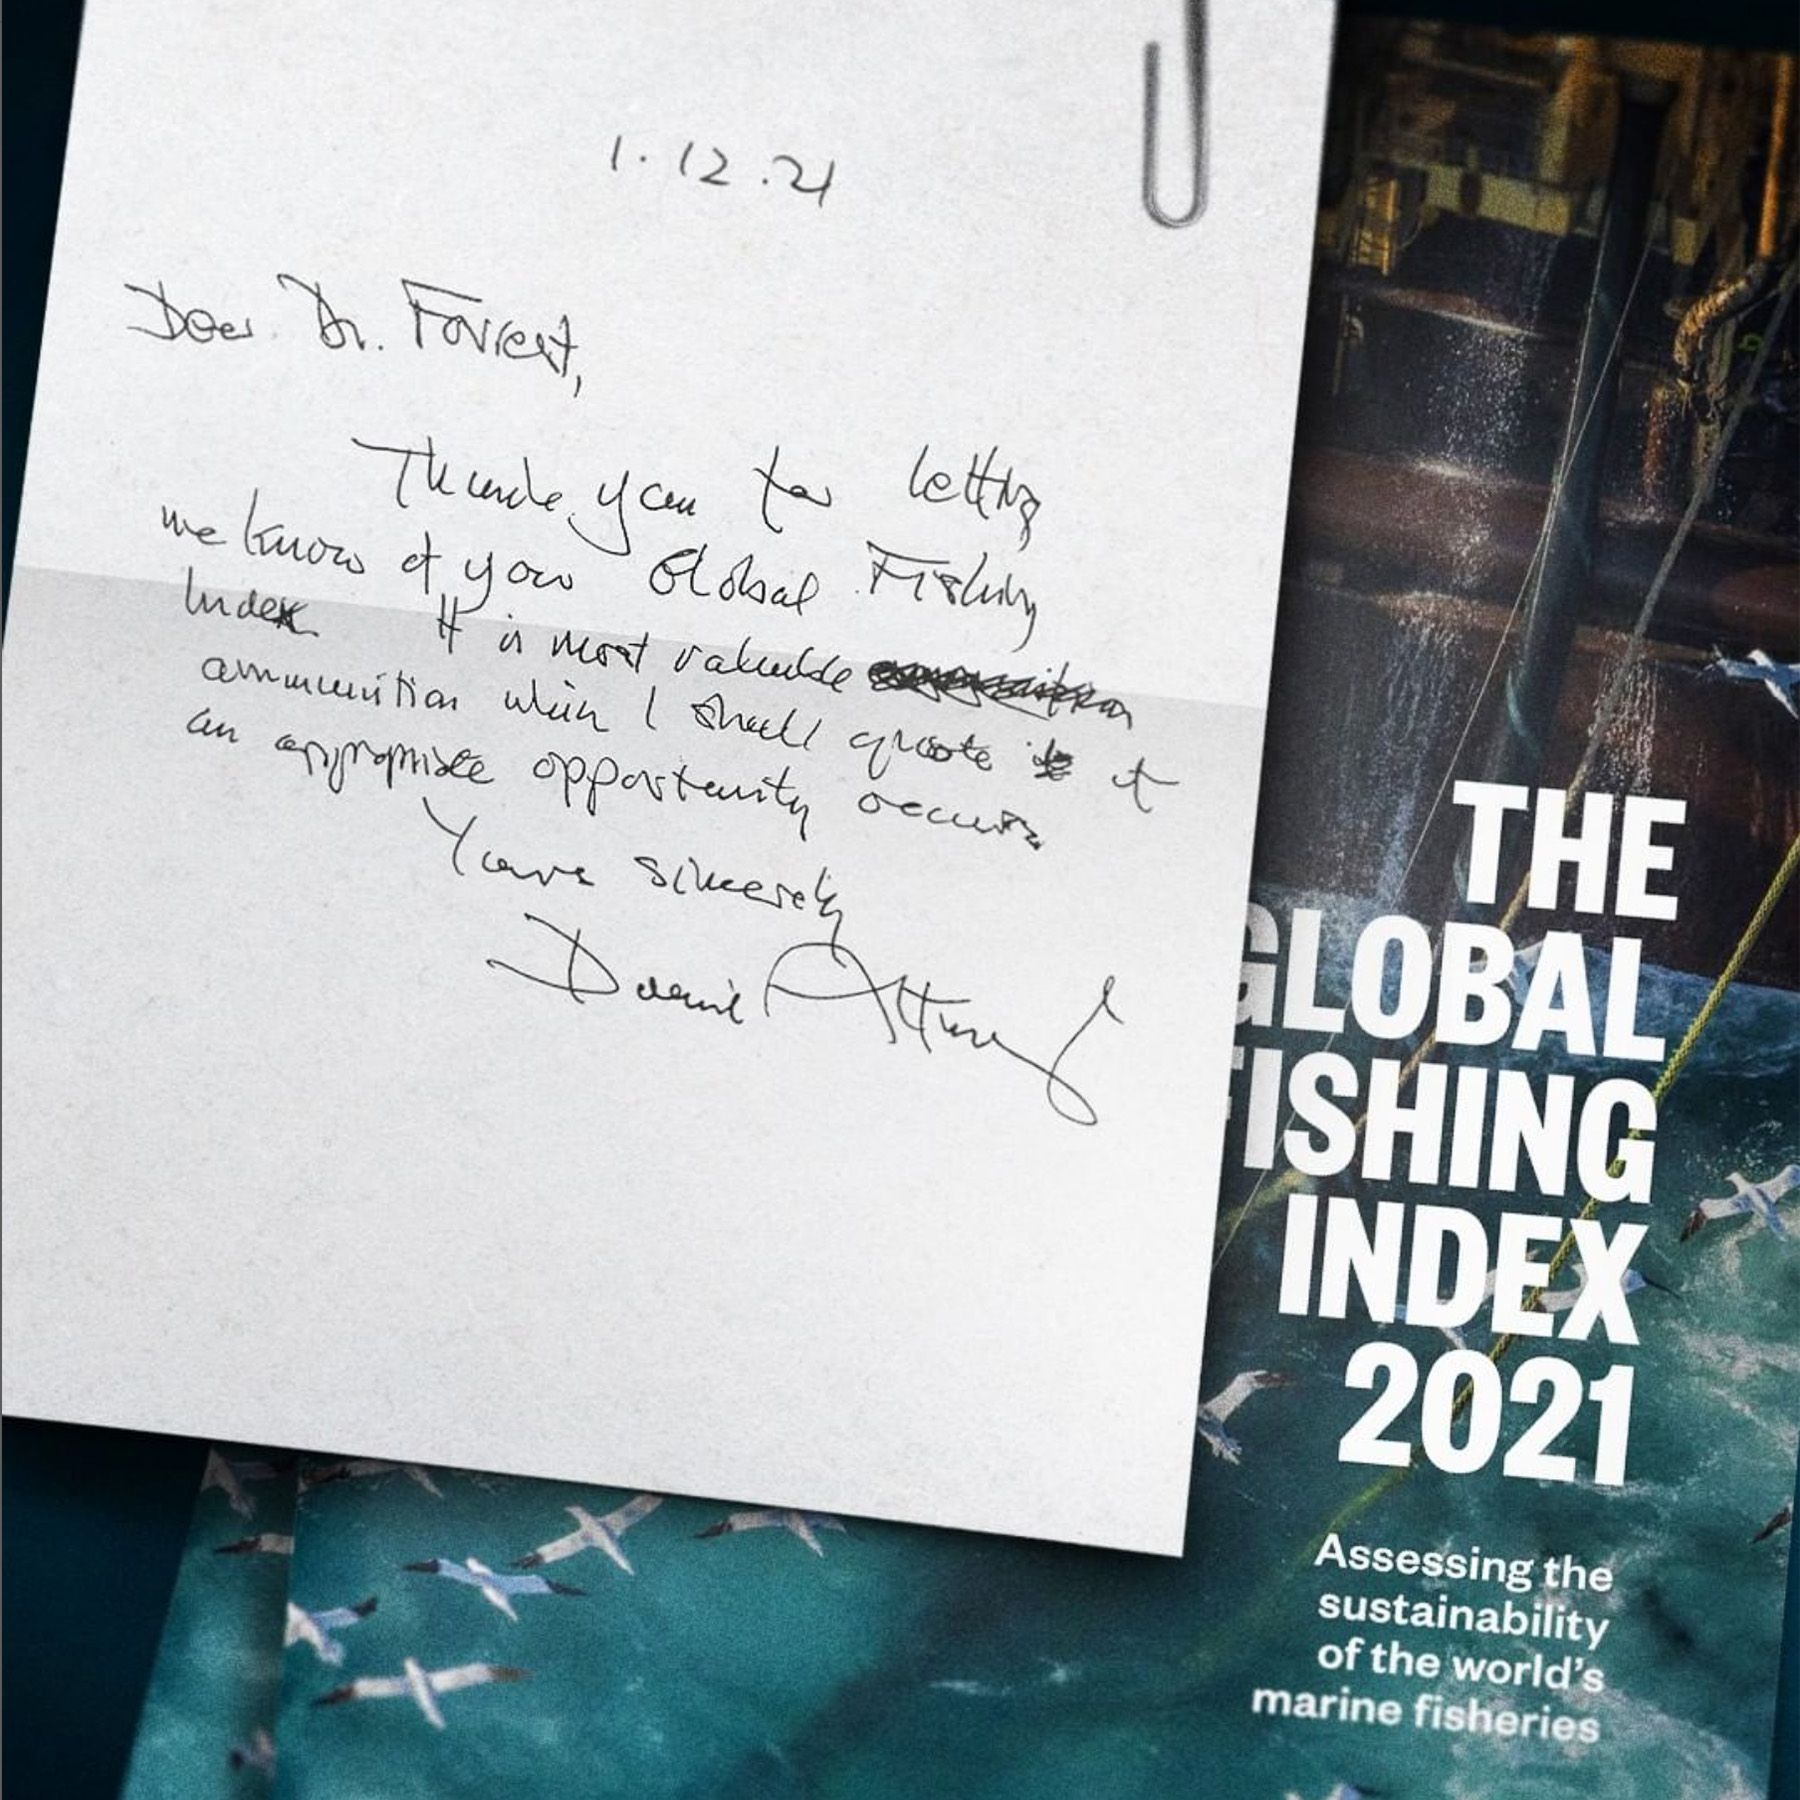 Handwritten letter from Sir David Attenborough paper clipped to the Global Fishing Index 2021 report.